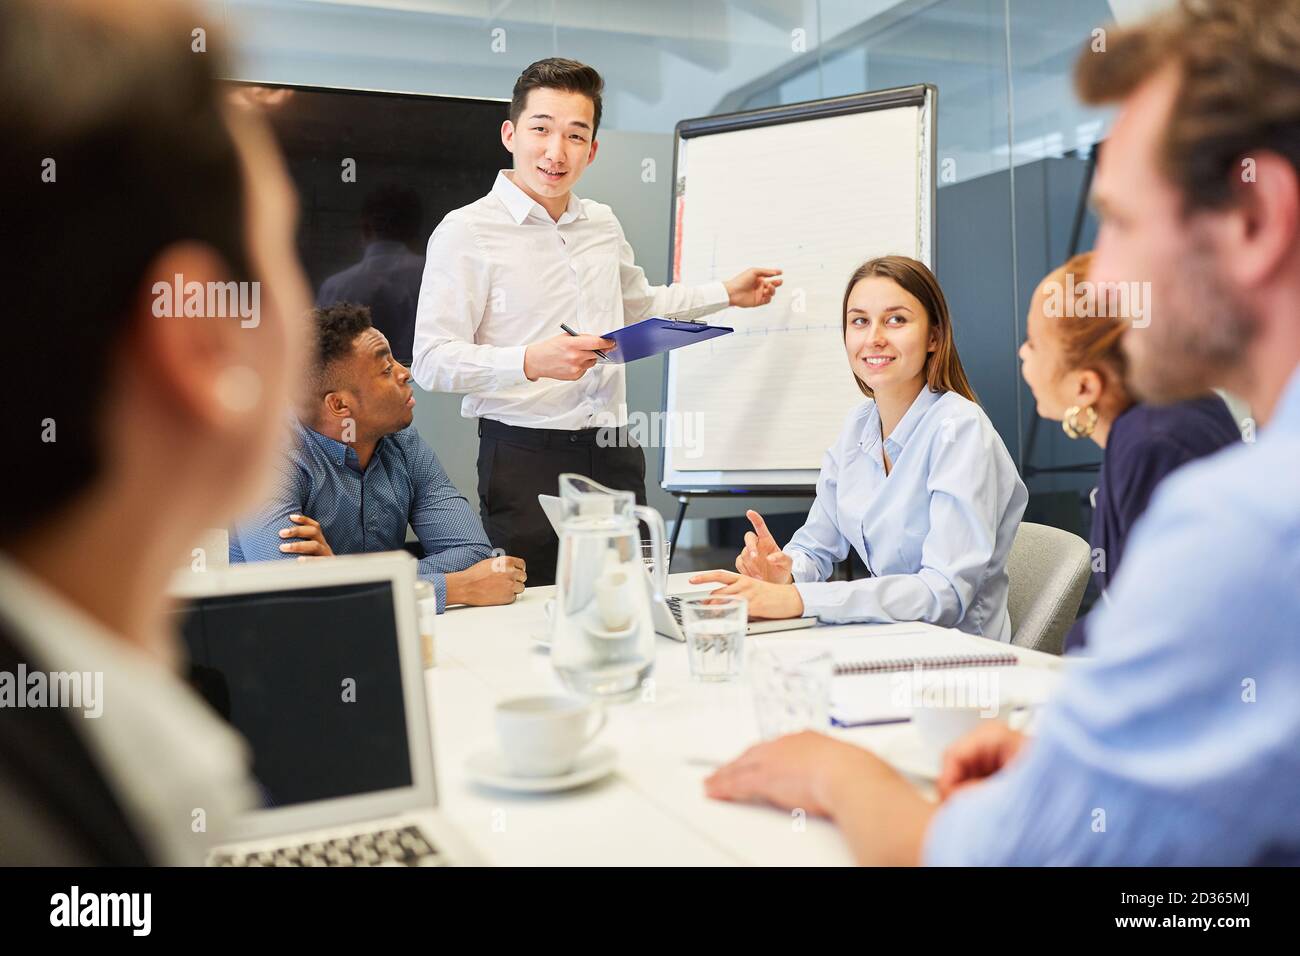 Asian businessman giving a presentation on the whiteboard Stock Photo